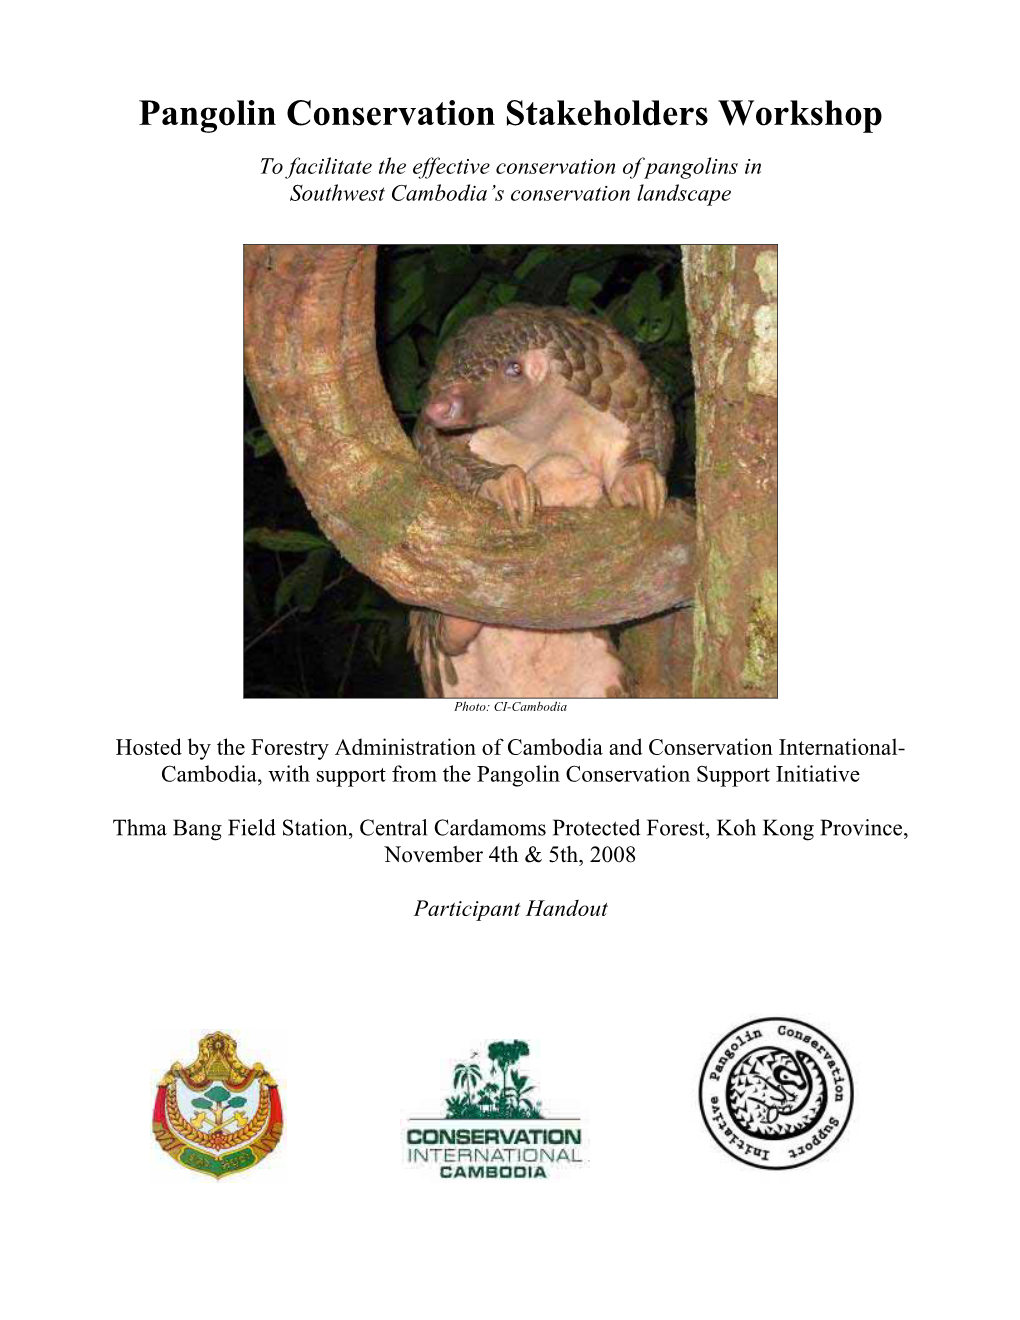 Pangolin Conservation Stakeholders Workshop: Participant Packet